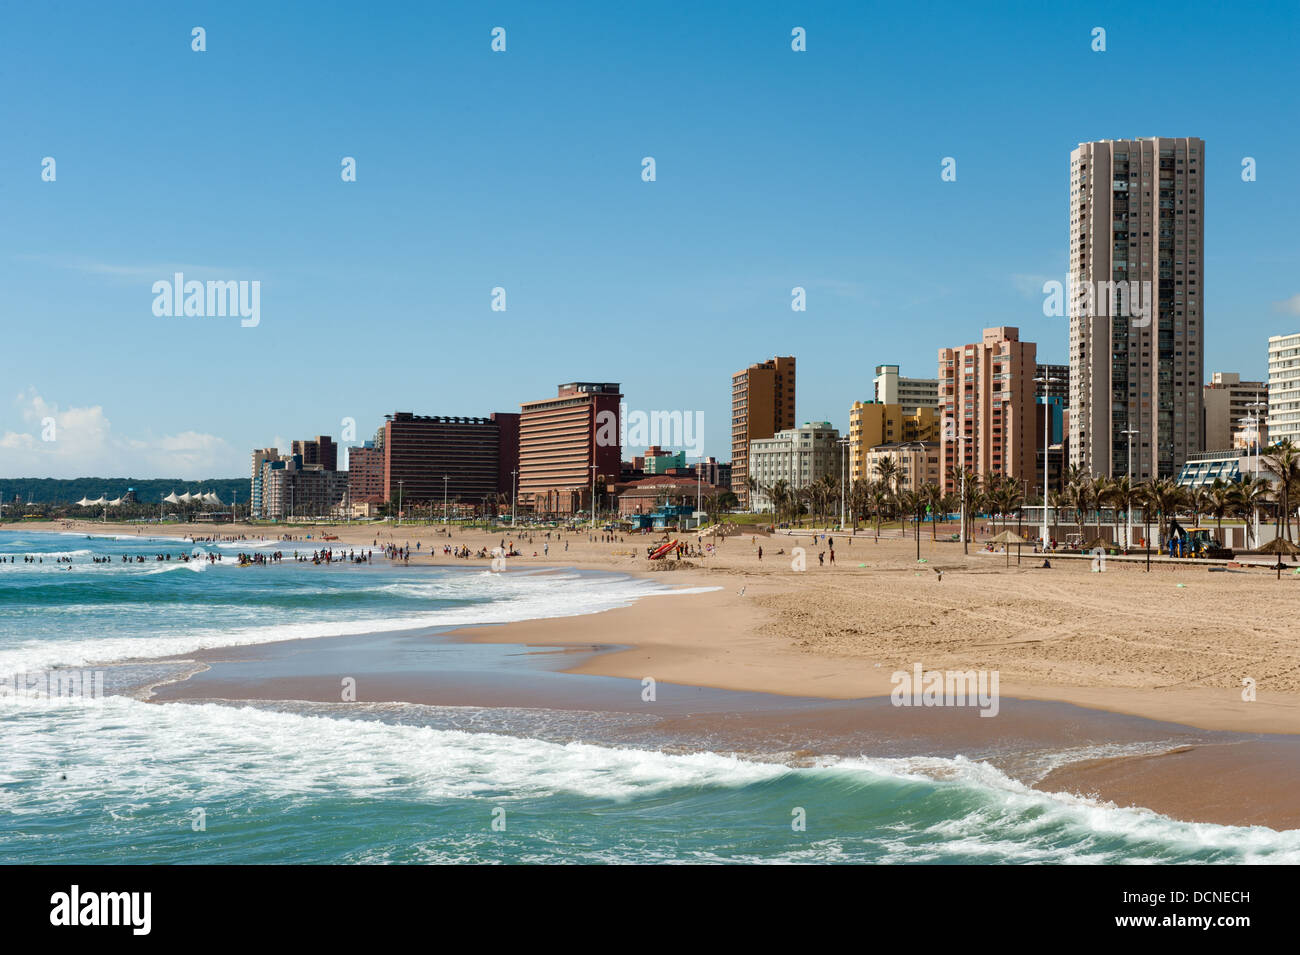 Durban waterfront, South Africa Stock Photo